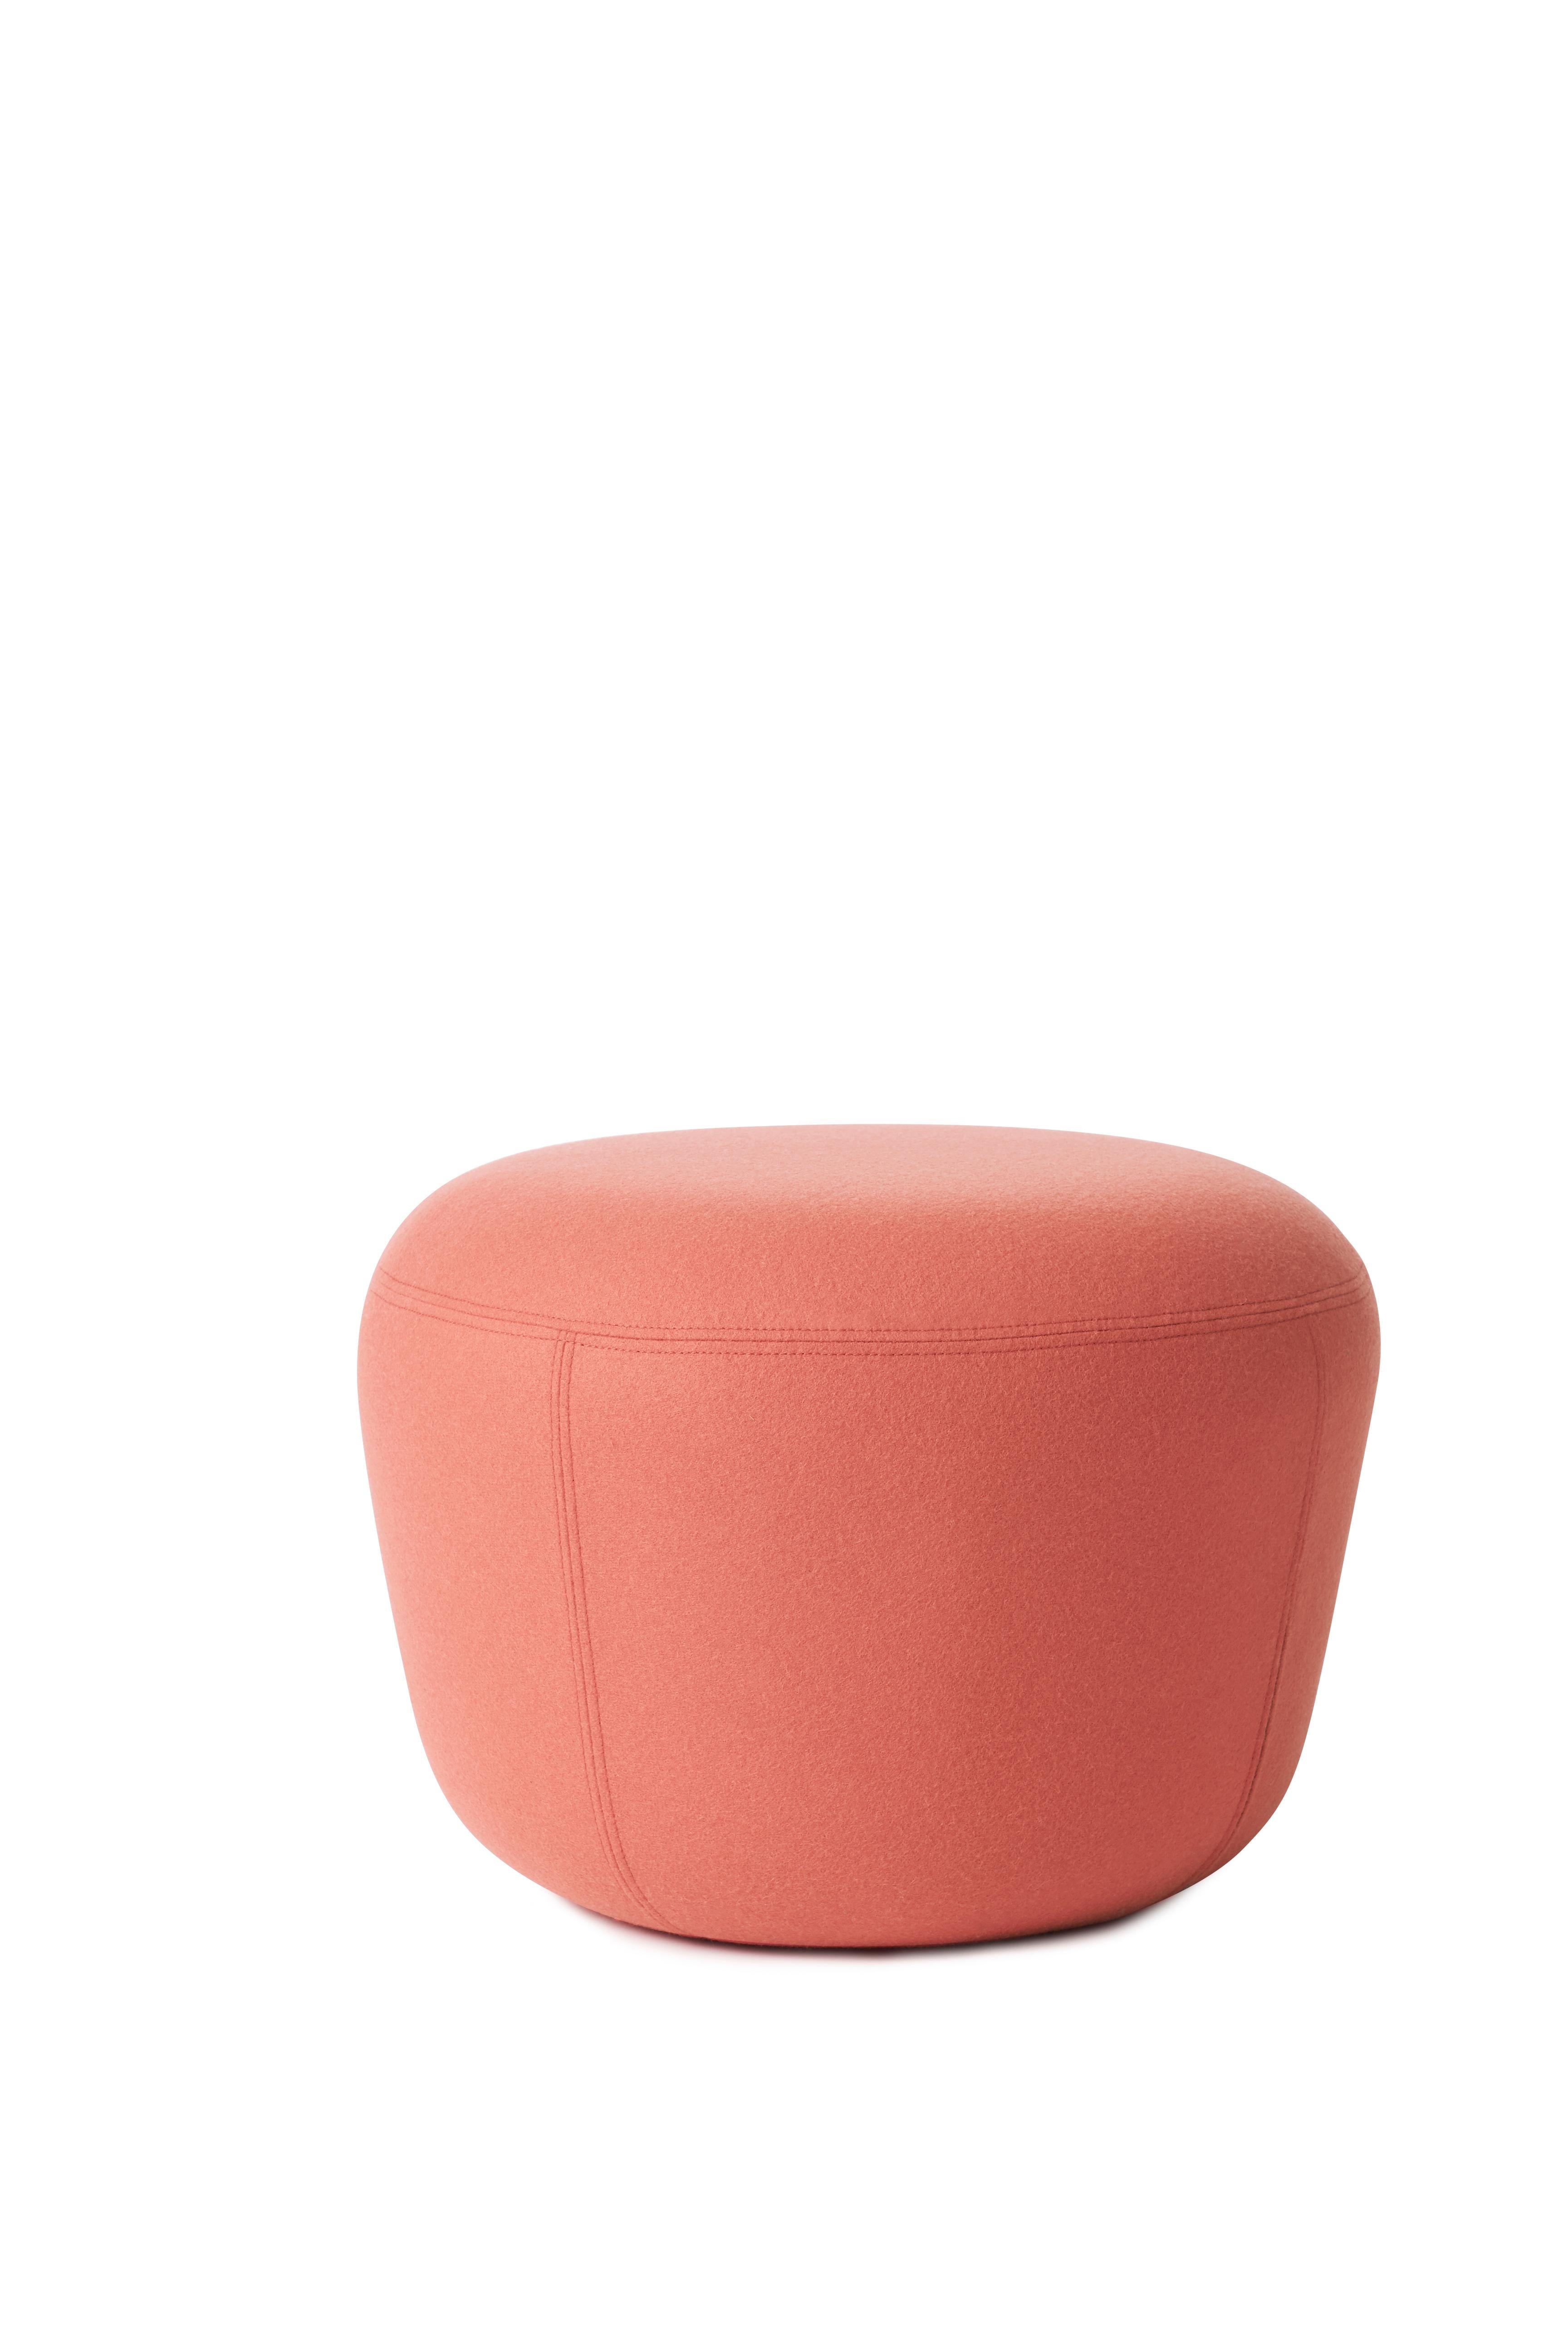 For Sale: Pink (Hero 541) Haven Pouf, by Charlotte Høncke from Warm Nordic